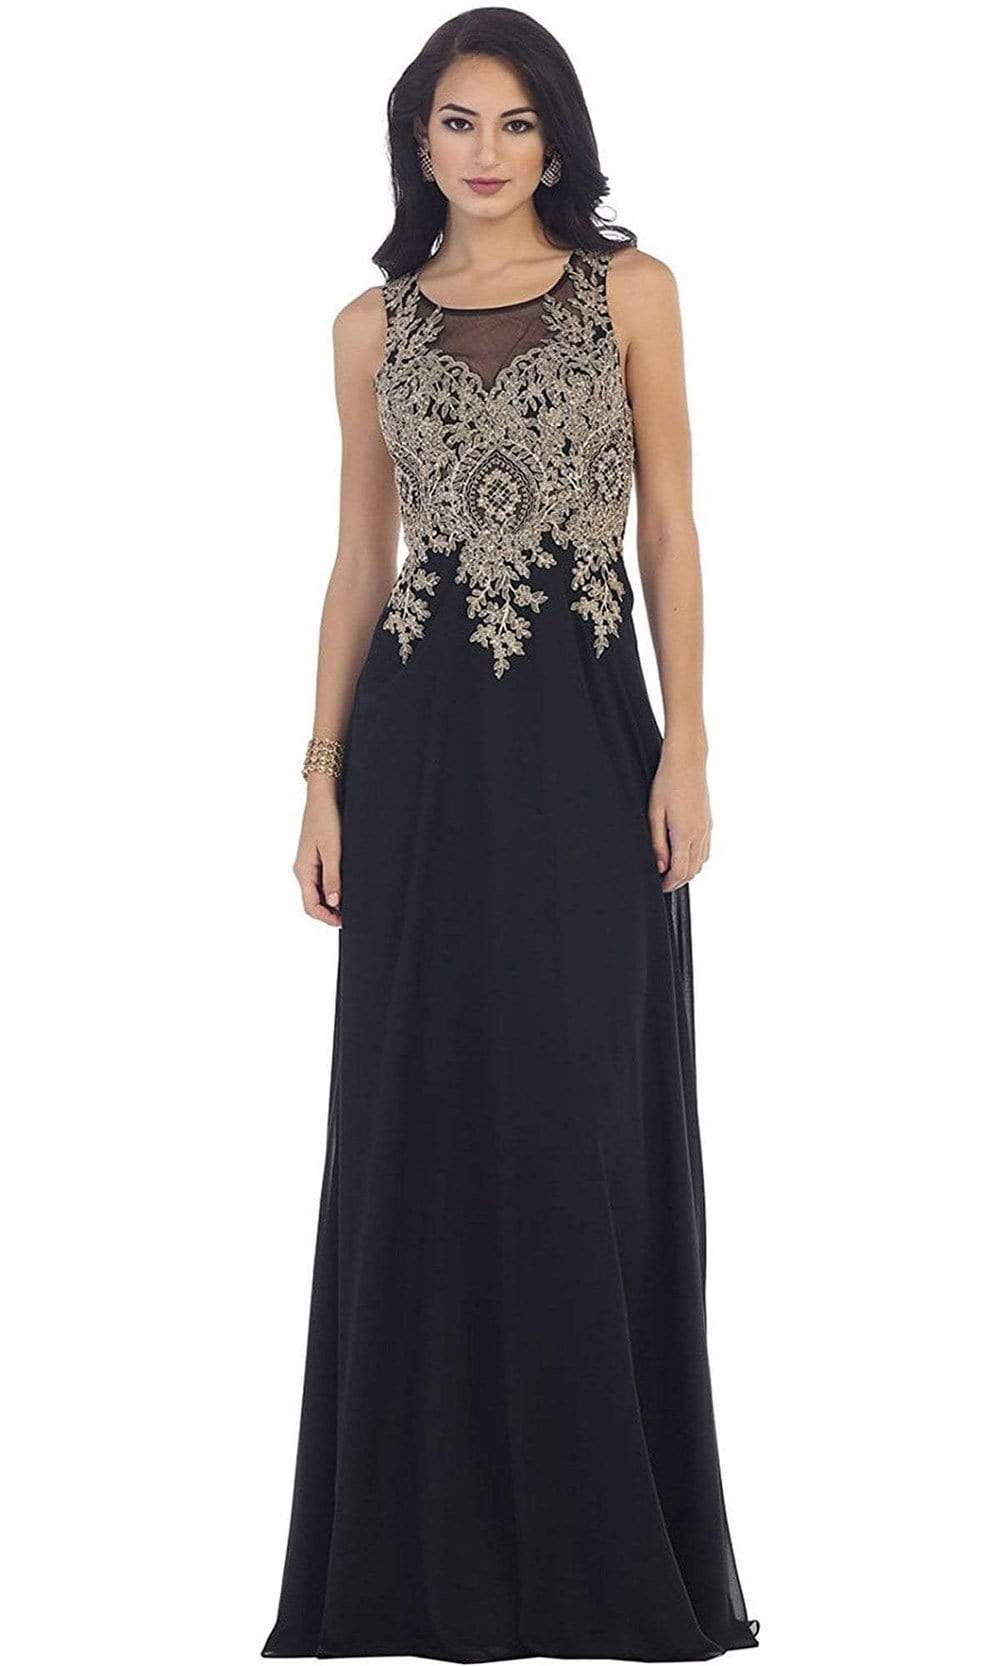 May Queen - Illusion Ornate Lace Prom Gown Special Occasion Dress 4 / Black